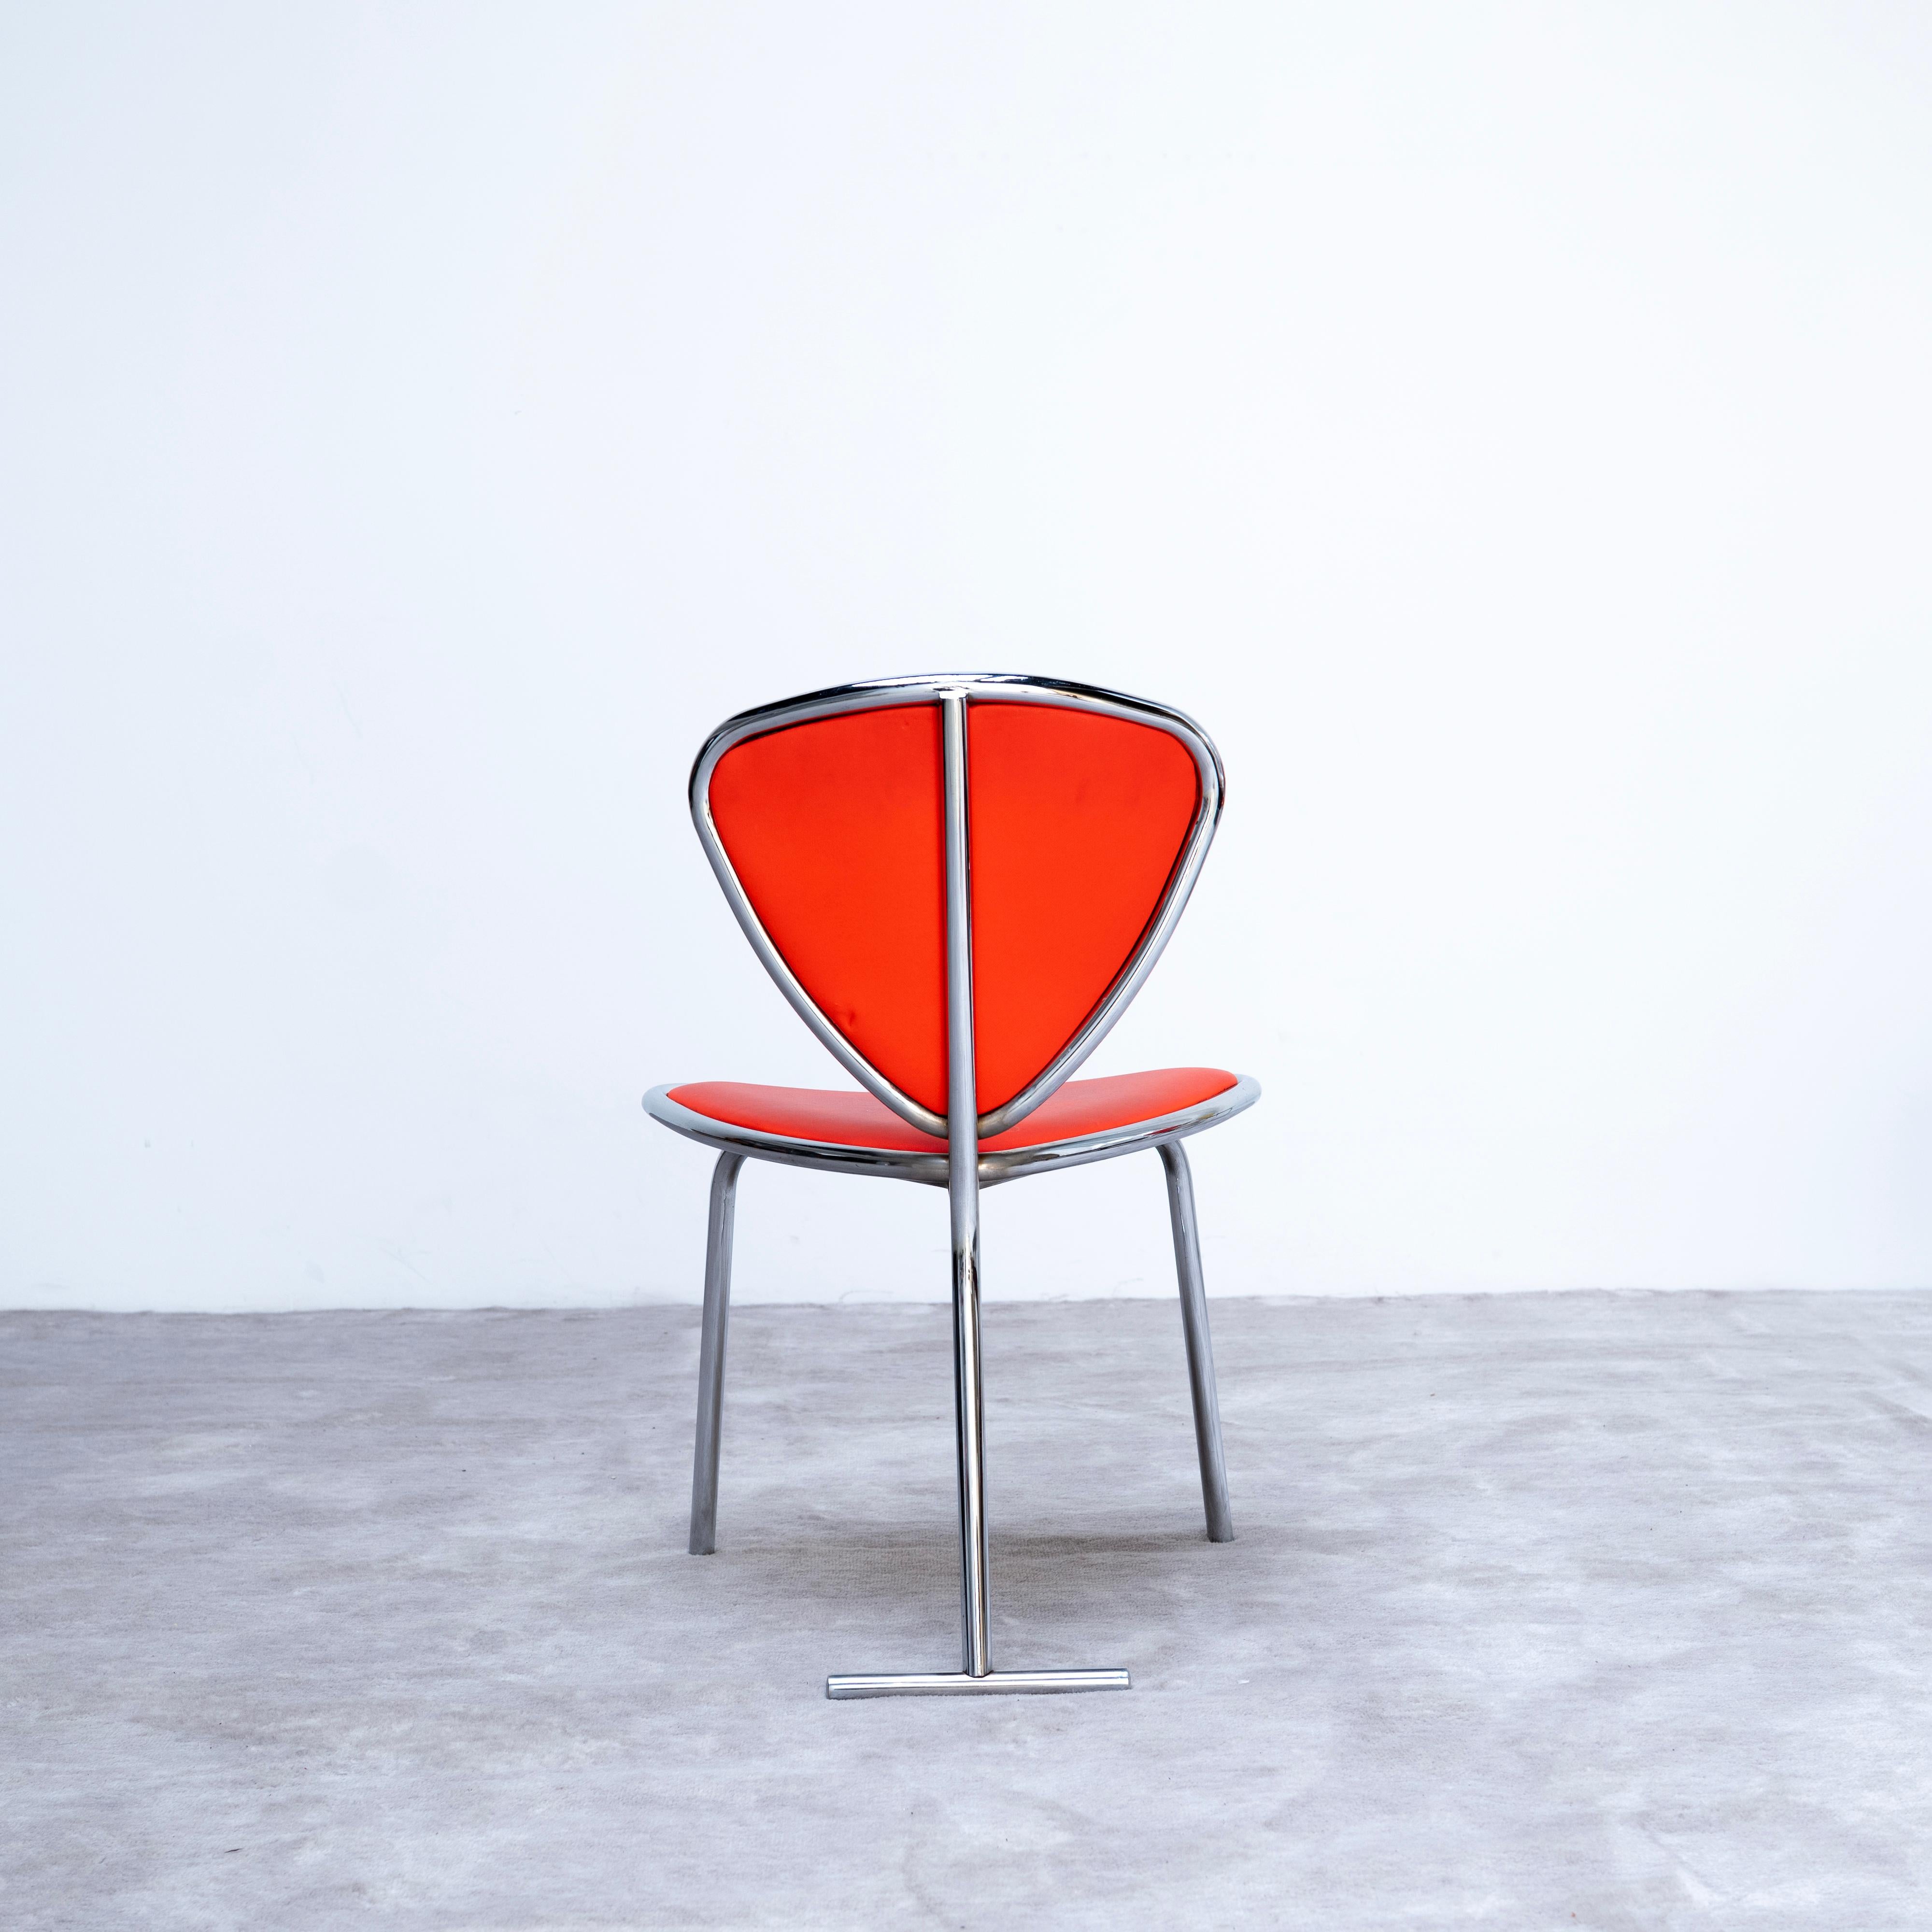 Dning chair From French Institute of Japan - Tokyo by Claudio Colucci 3